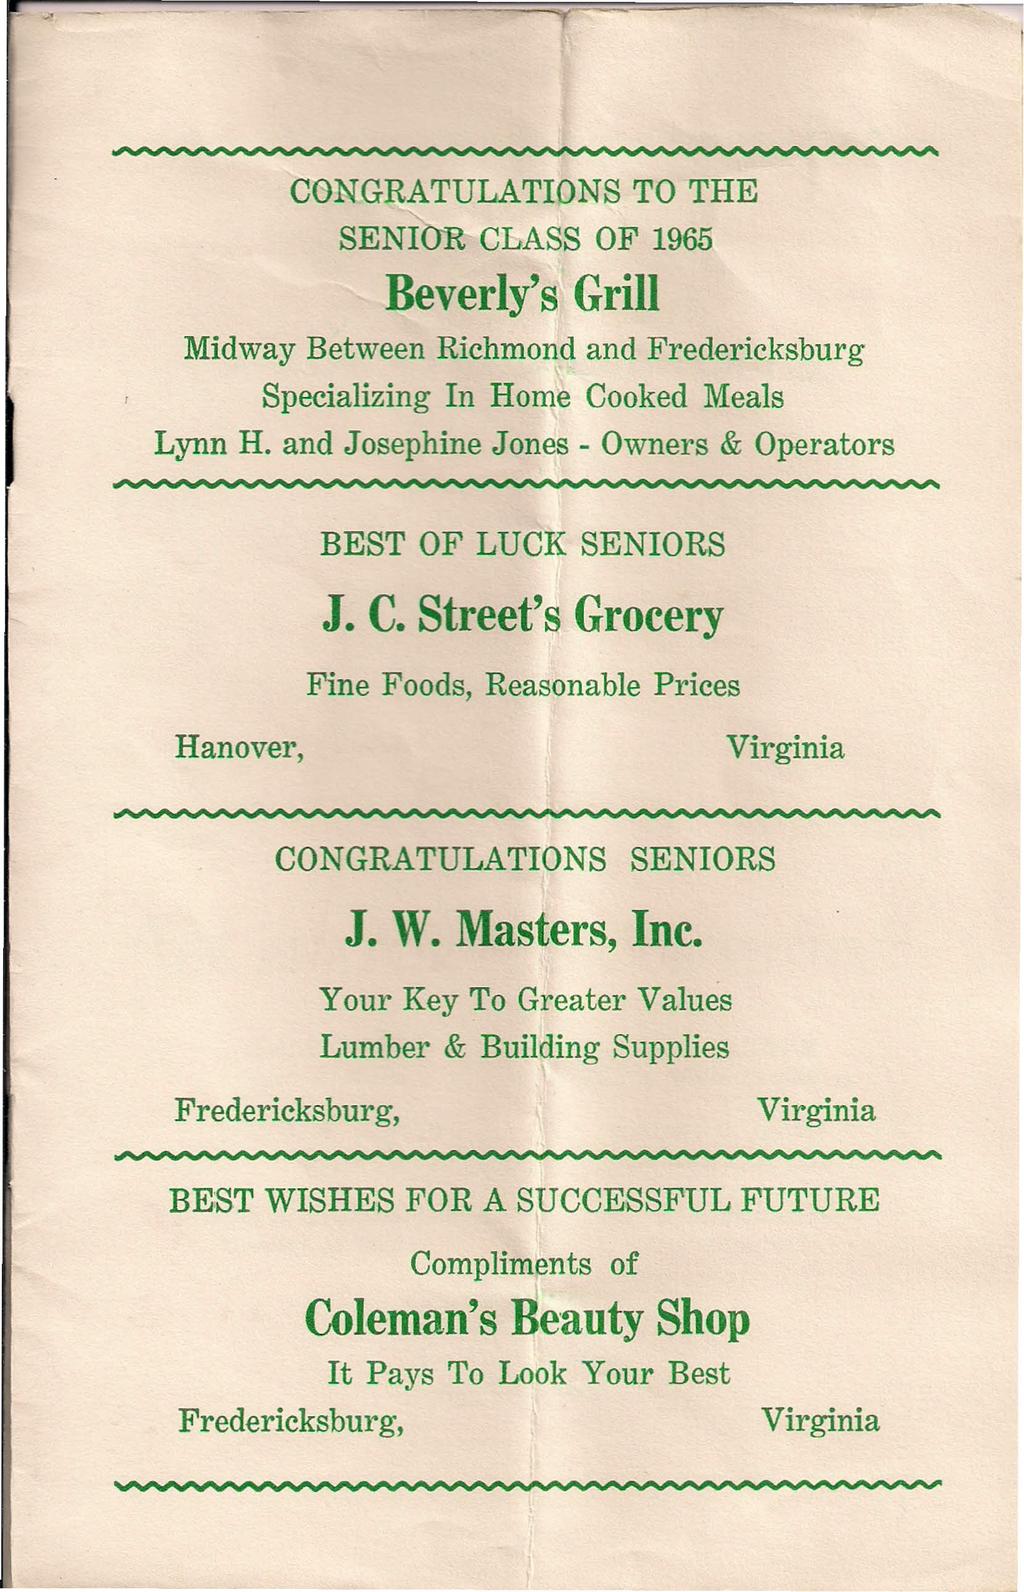 CONGRATULATIONS TO THE SENIOR CLASS OF 1965 Beverly's Grill Midway Between Richmond and Fredericksburg Specializing In Home Cooked Meals Lynn H.